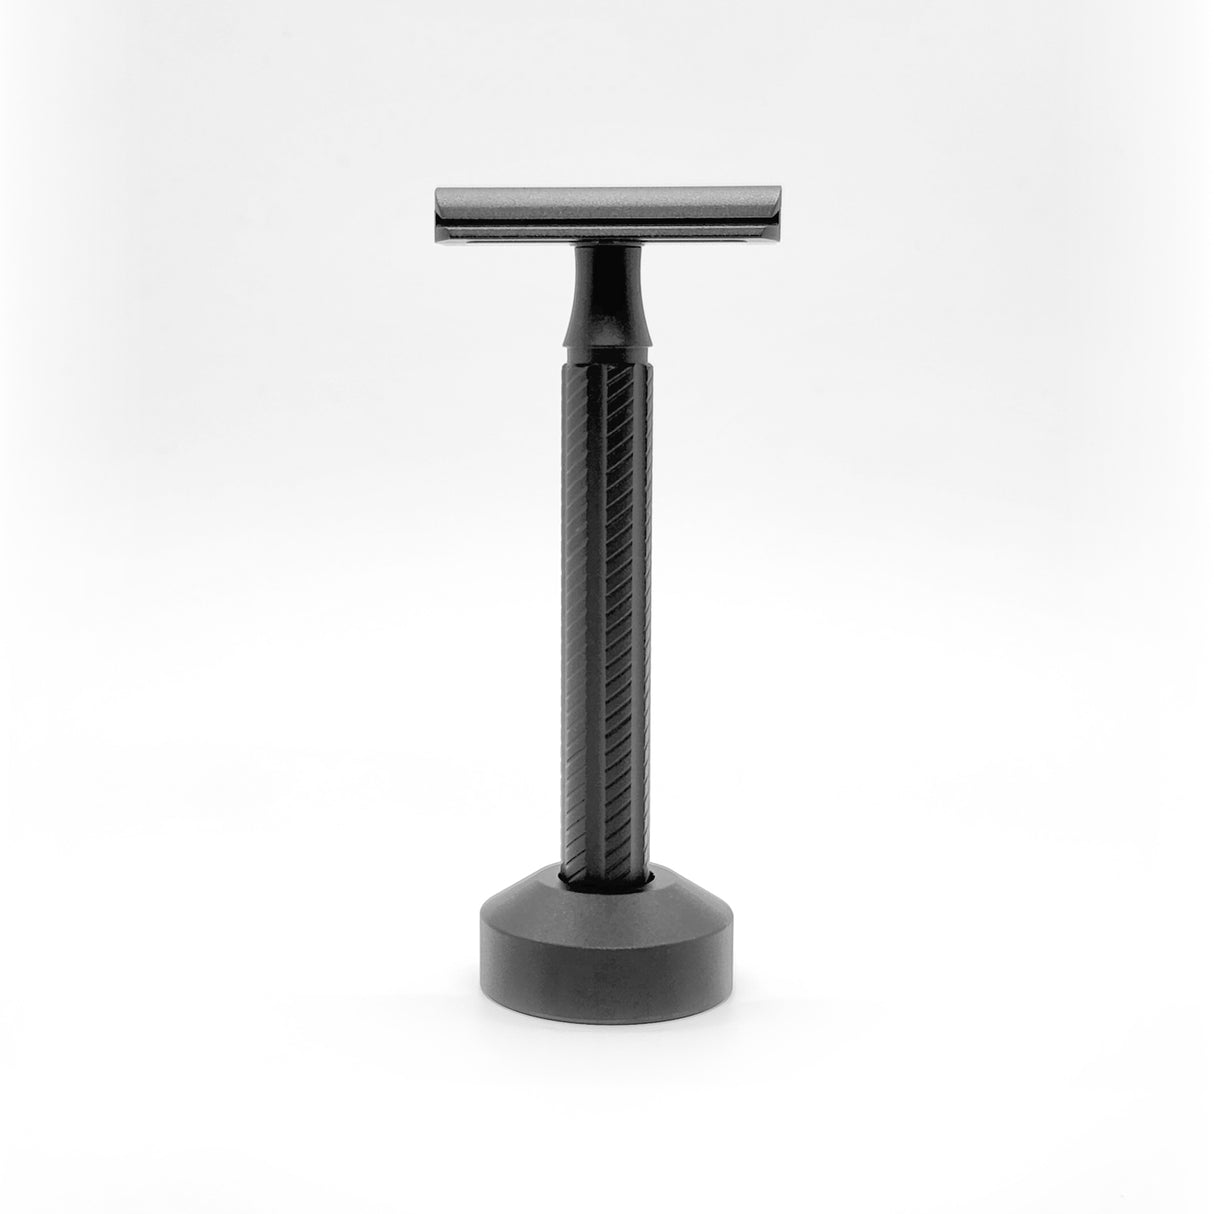 Aylsworth - The APEX - Aluminum Inkwell Stand - Safety Razor Stand